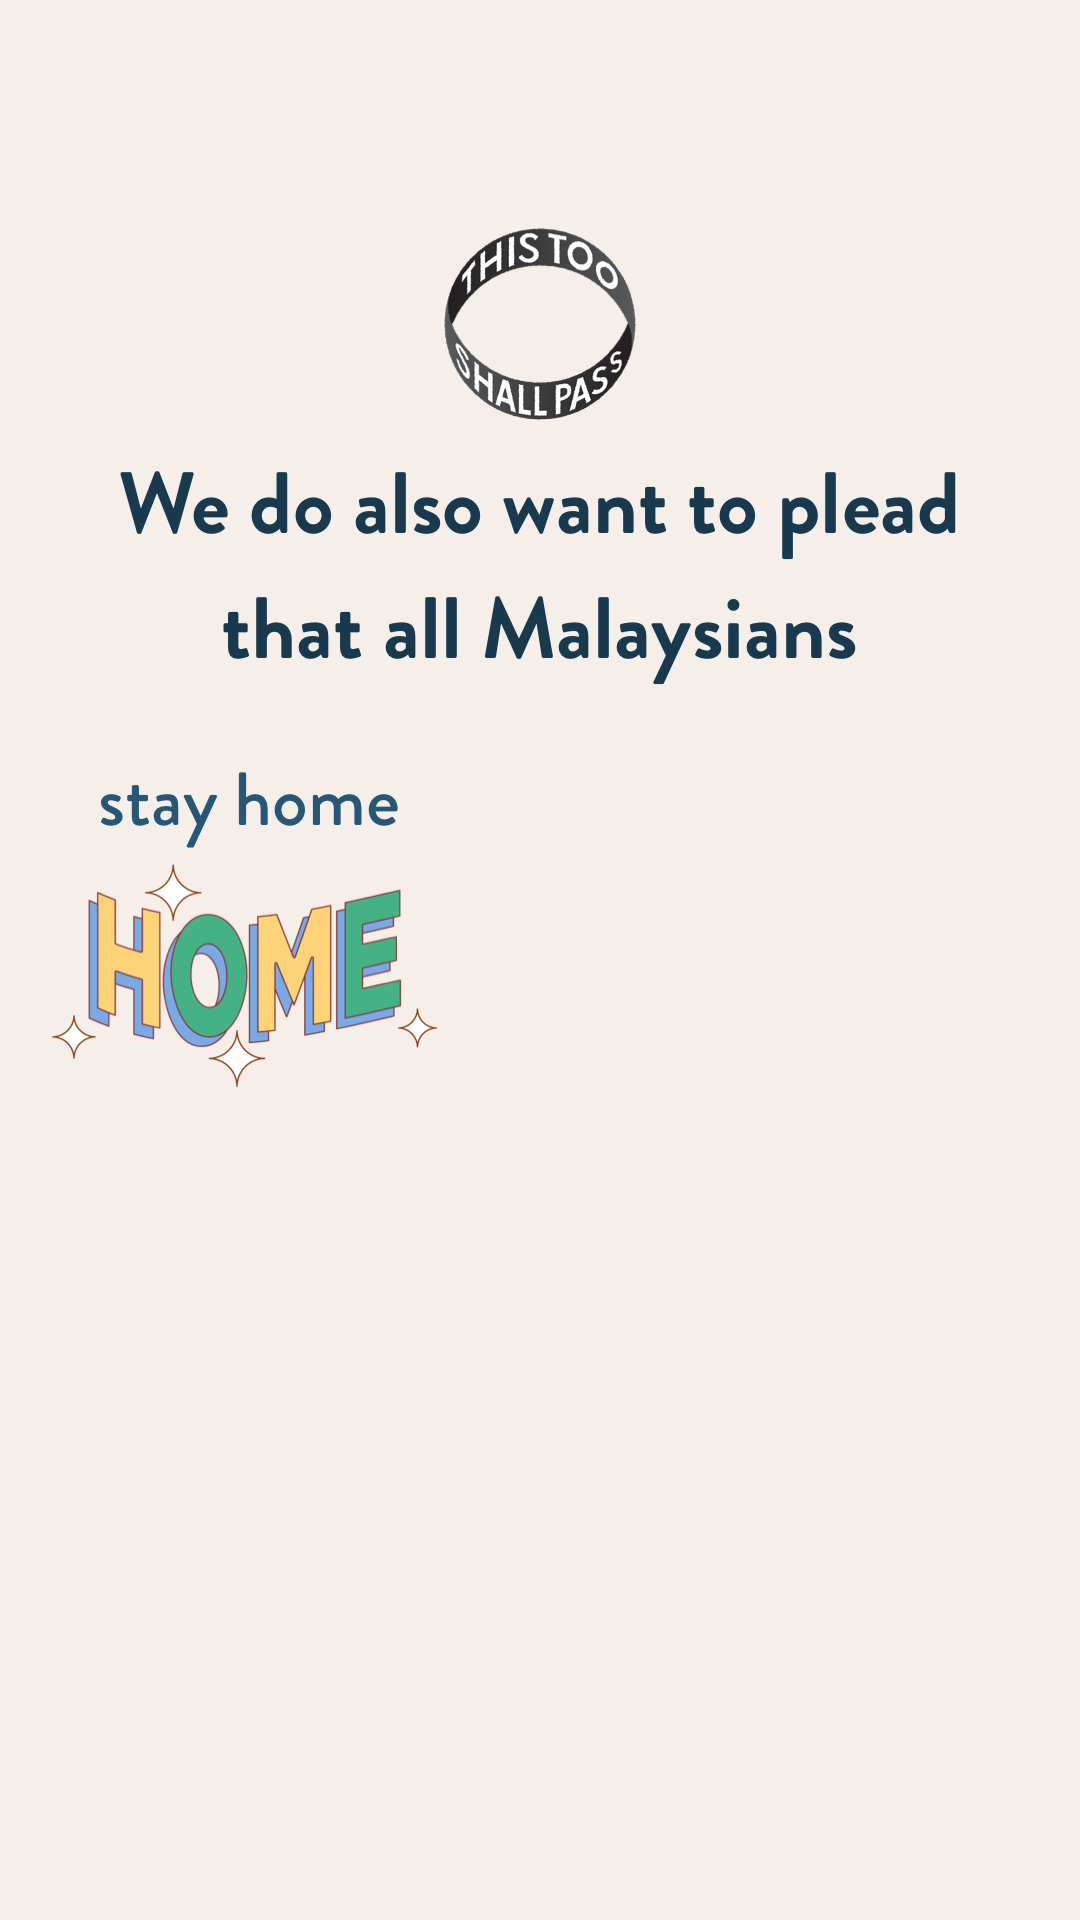 We also want to plead that all Malaysians stay home,